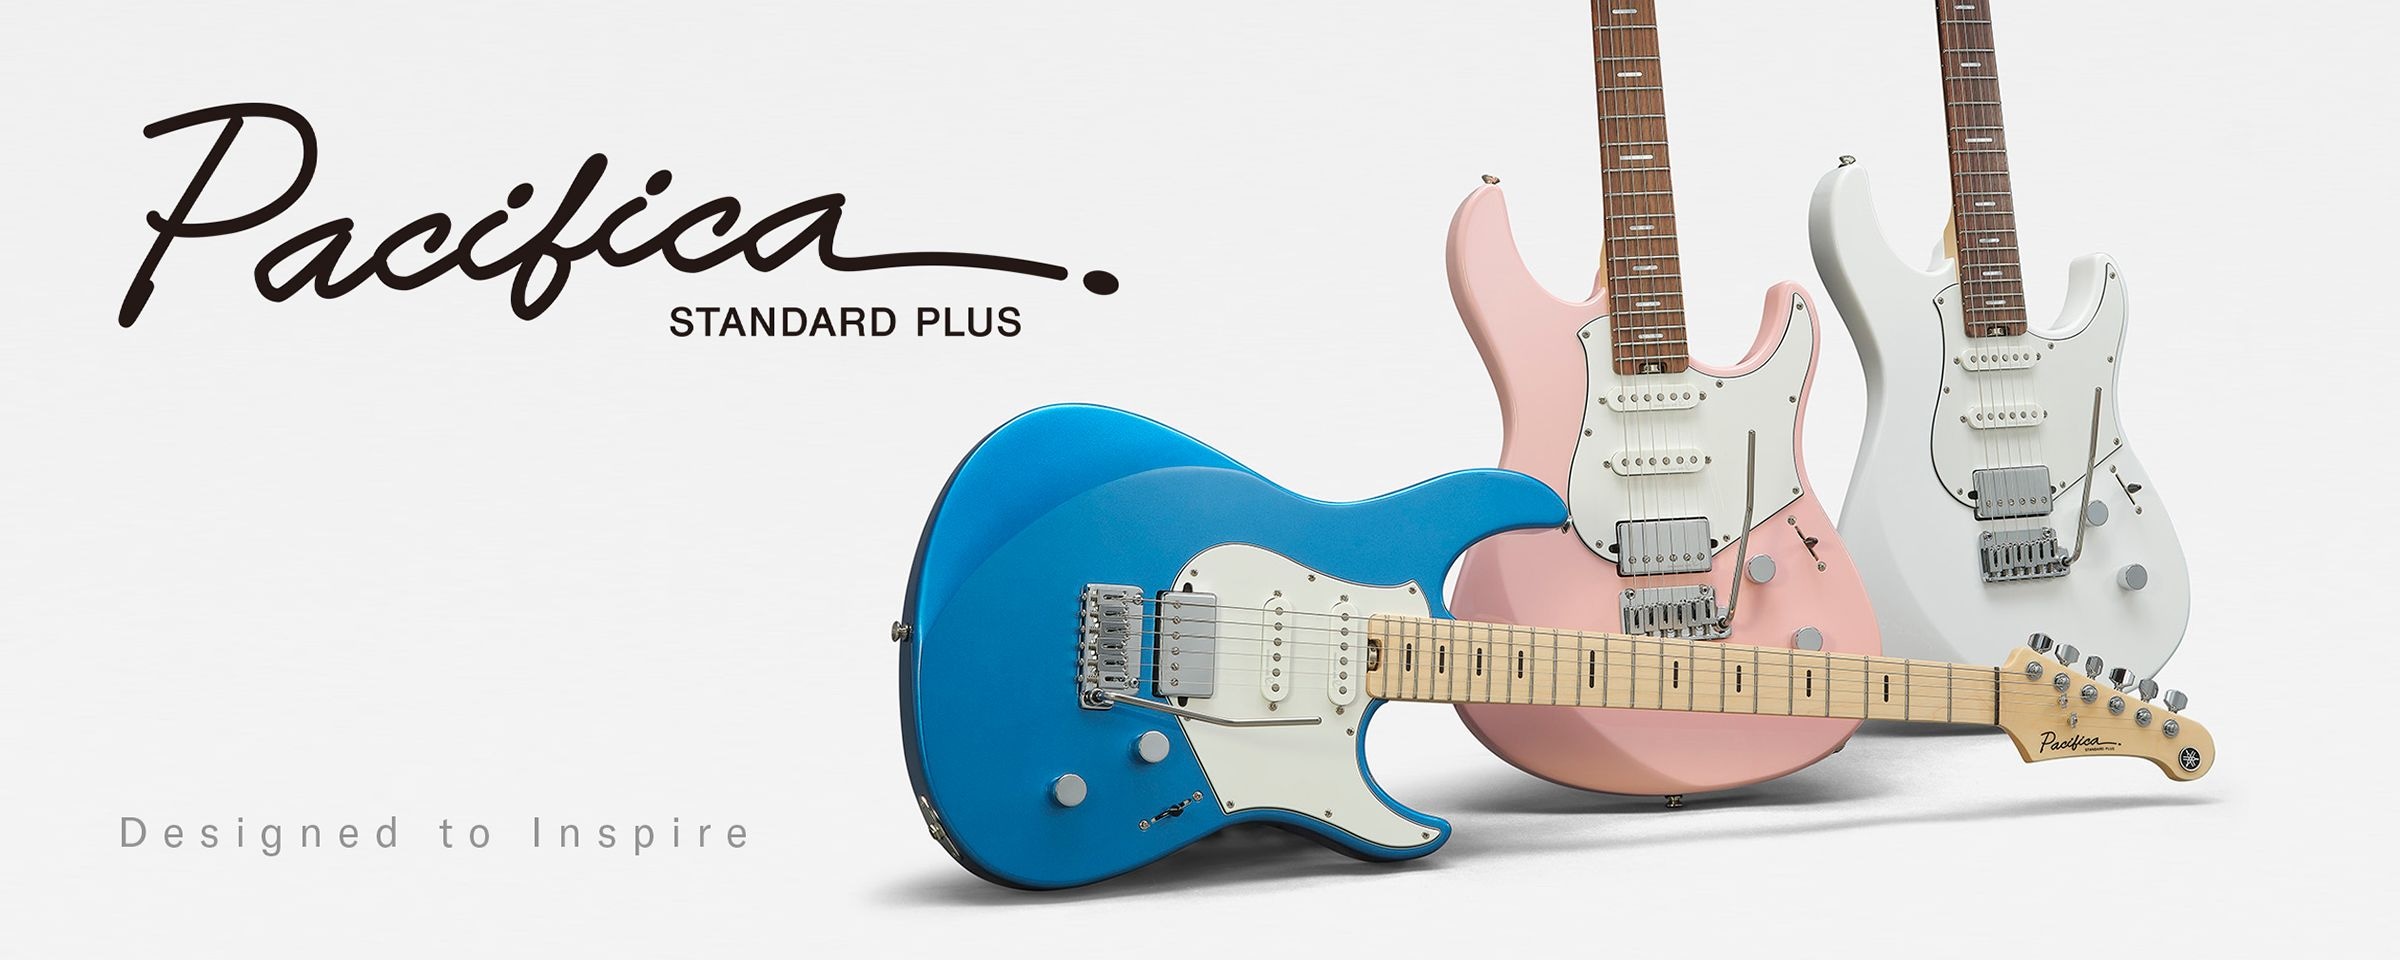 White background. Left: Pacifica professional logo & designed to inspire text. Right: 3 guitars